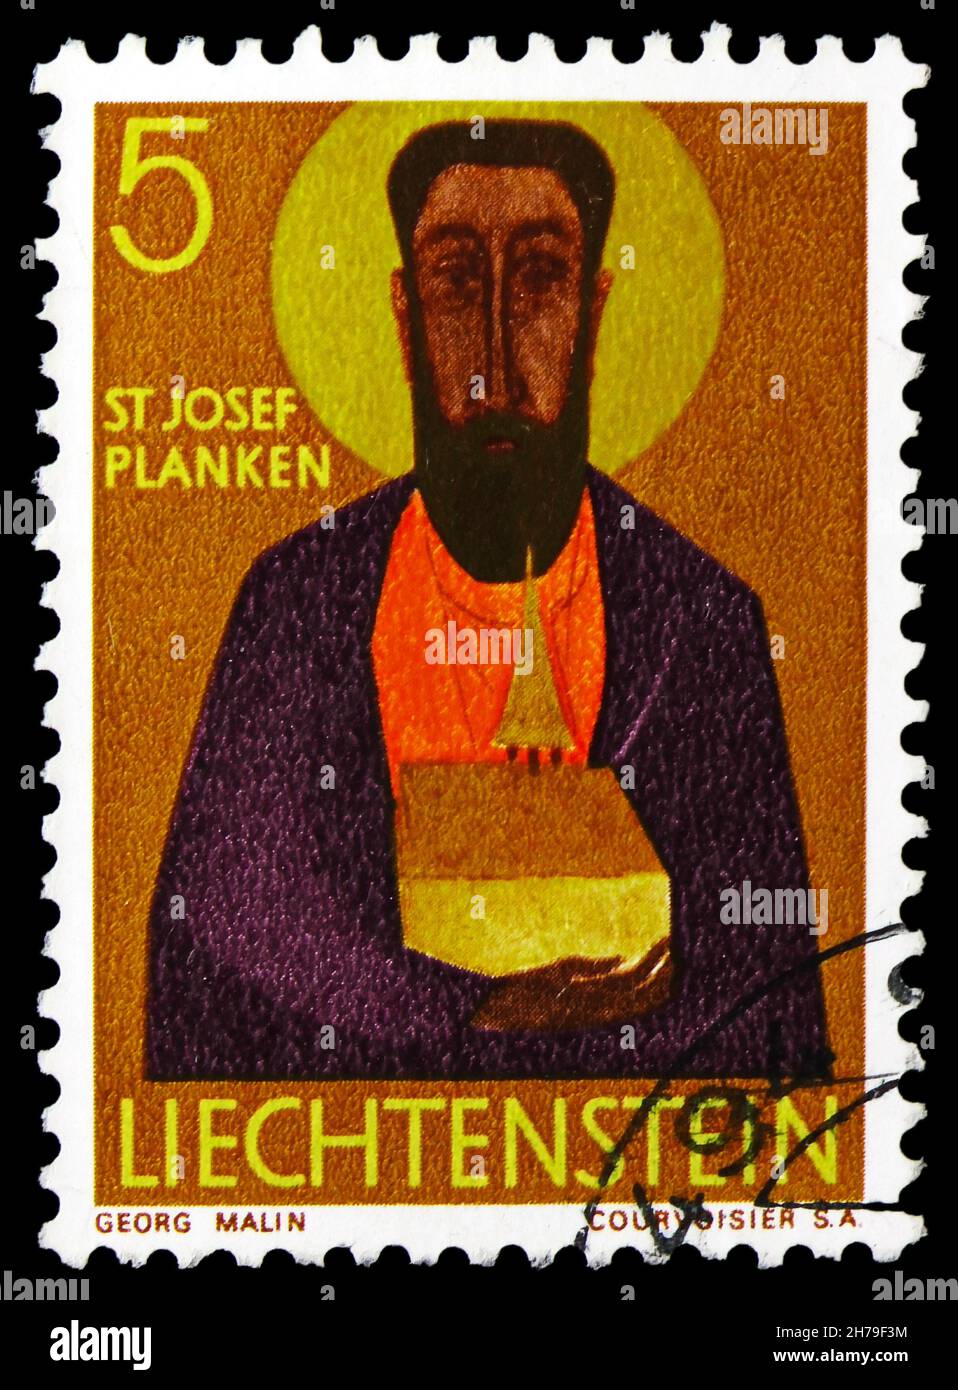 MOSCOW, RUSSIA - OCTOBER 25, 2021: Postage stamp printed in Liechtenstein shows Saint Josef, Planken, Patrons of the eleven municipalities of the Prin Stock Photo